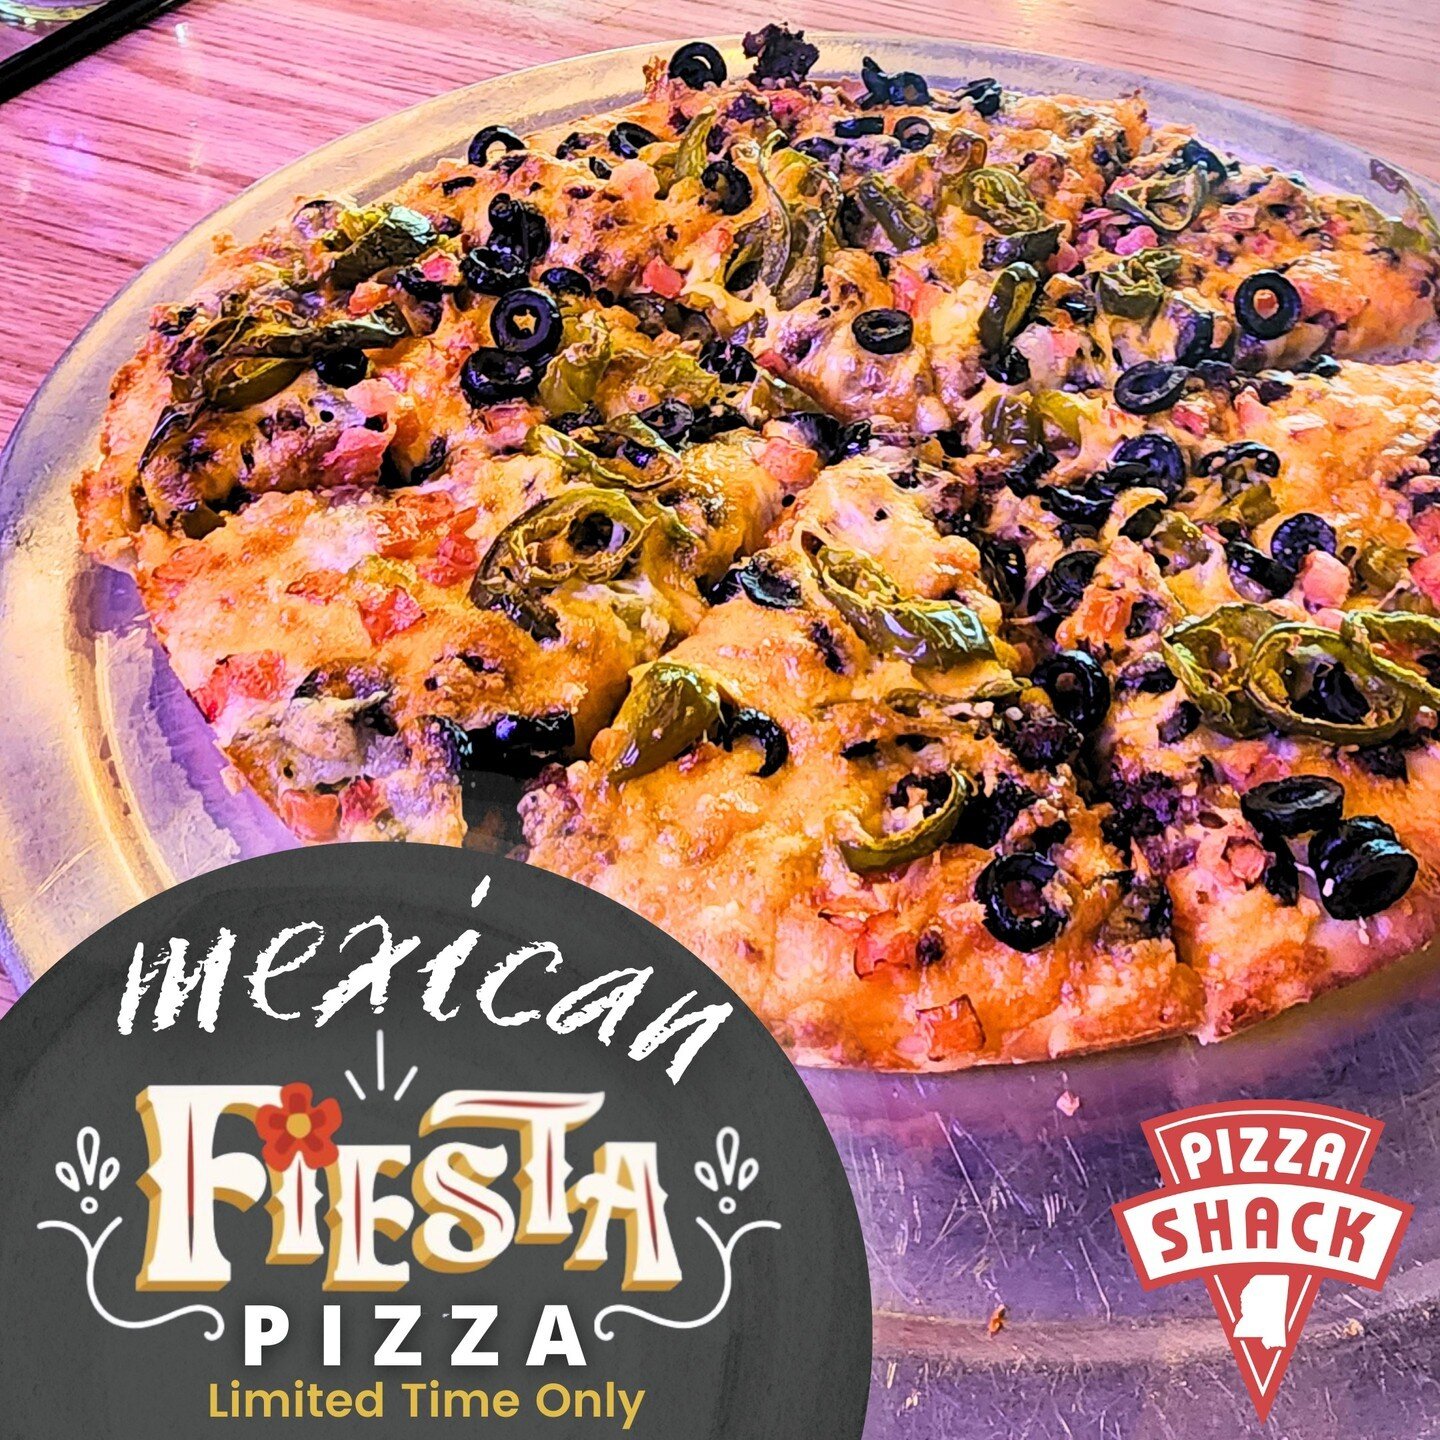 Our newest addition has all the toppings you love, plus a kick of picante sauce and a crunch from Doritos. Spice up your pizza game with our limited time Mexican Fiesta Pizza 🌶🍕. Don't miss out on trying it, order now!

Small $11.75 |  Medium $20.7